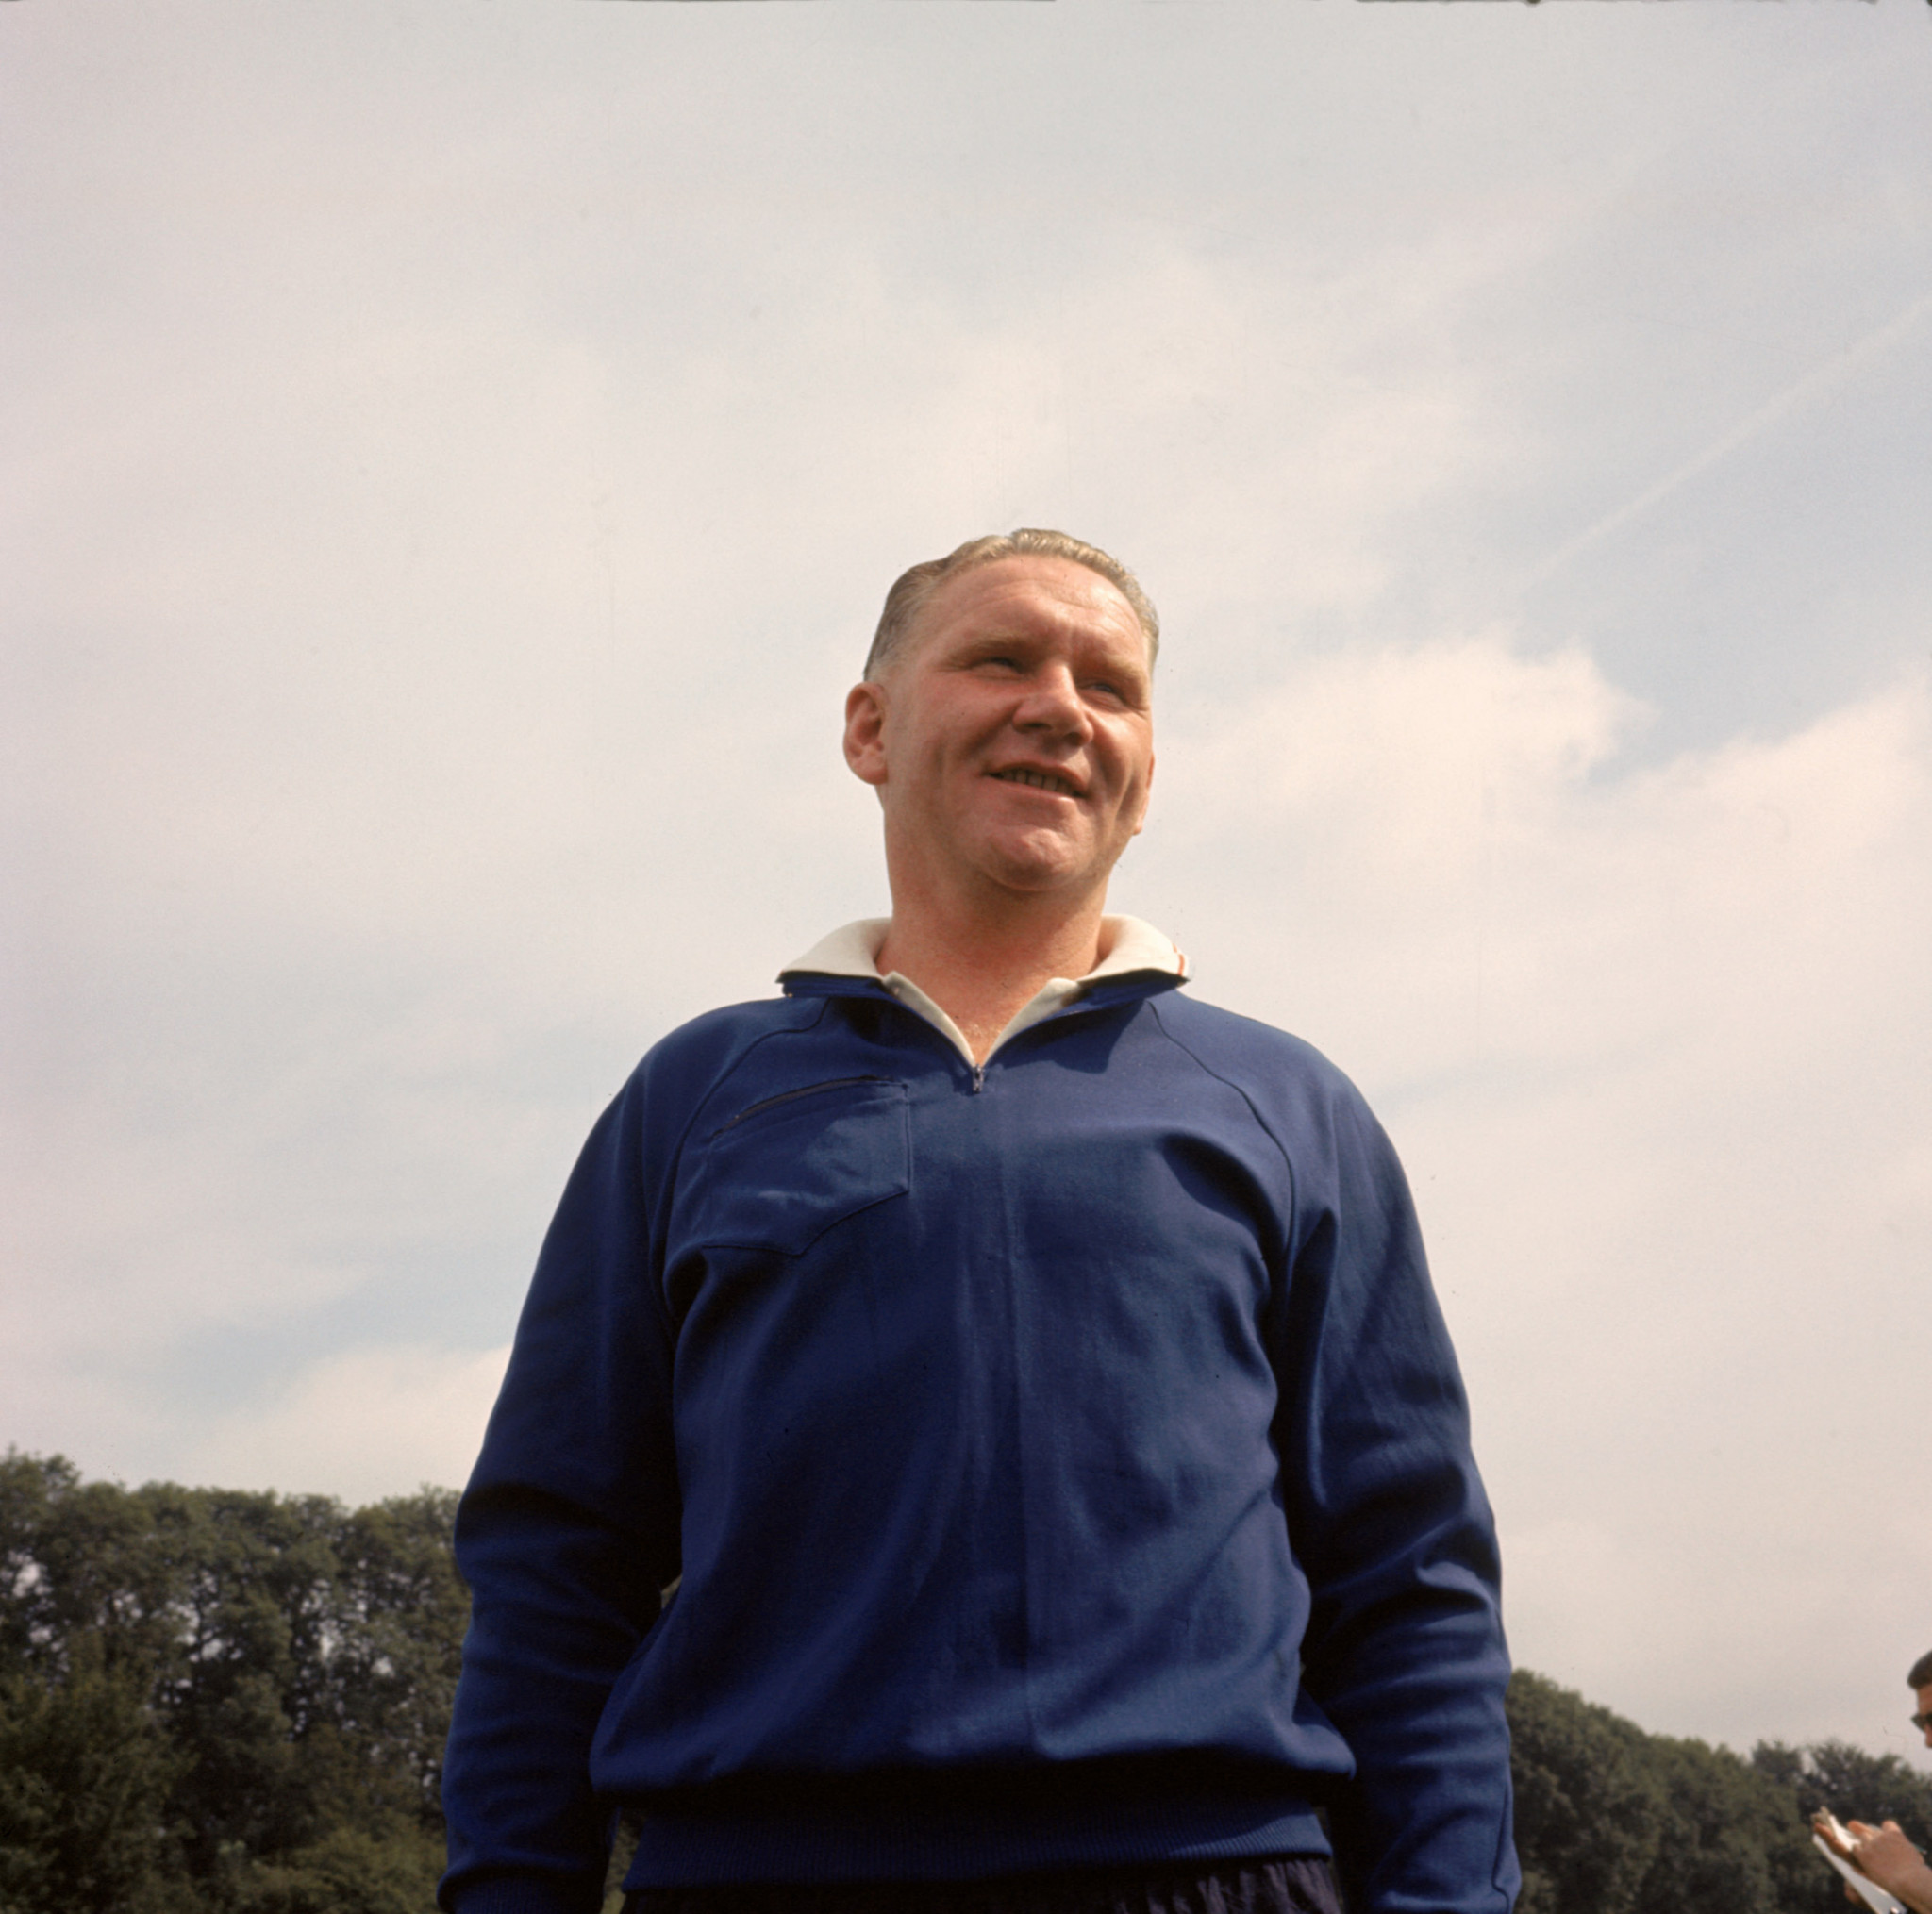 Bill Nicholson managed Tottenham in the greatest era of their history when they became the first British team to win a European trophy ©Getty Images